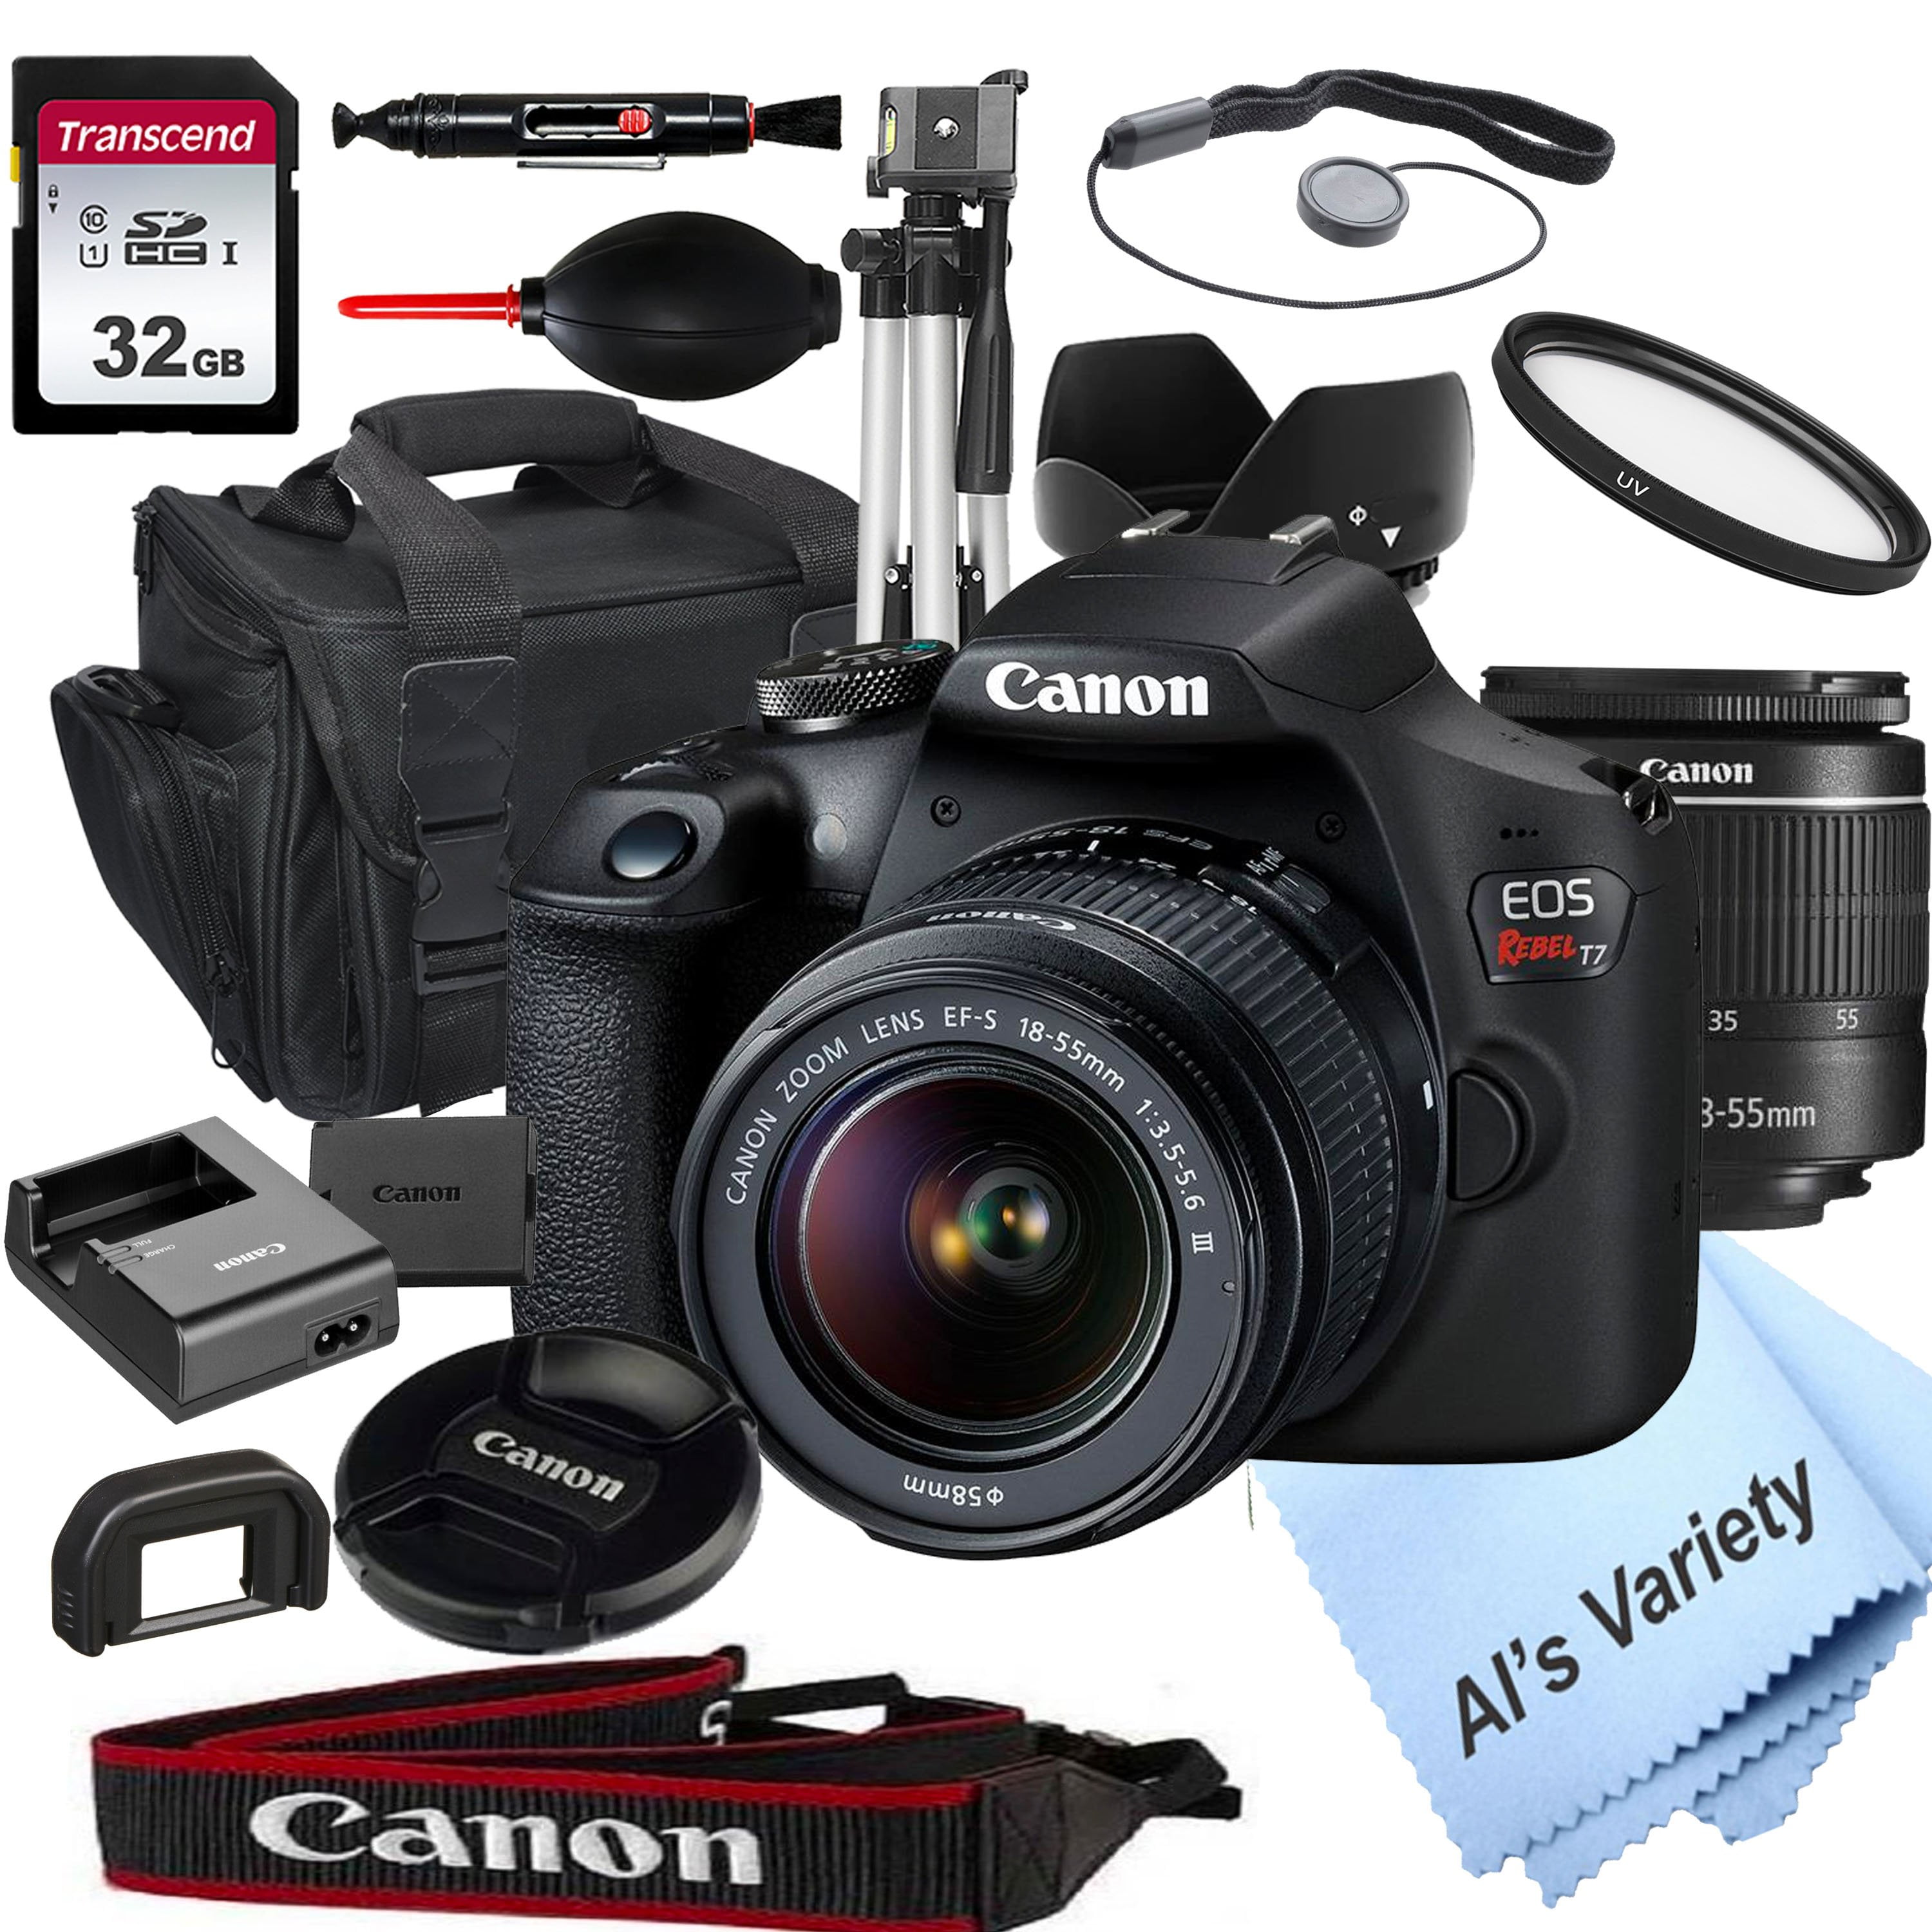 Canon EOS Rebel T7 DSLR Camera with 18-55mm f/3.5-5.6 Zoom Lens + 32GB